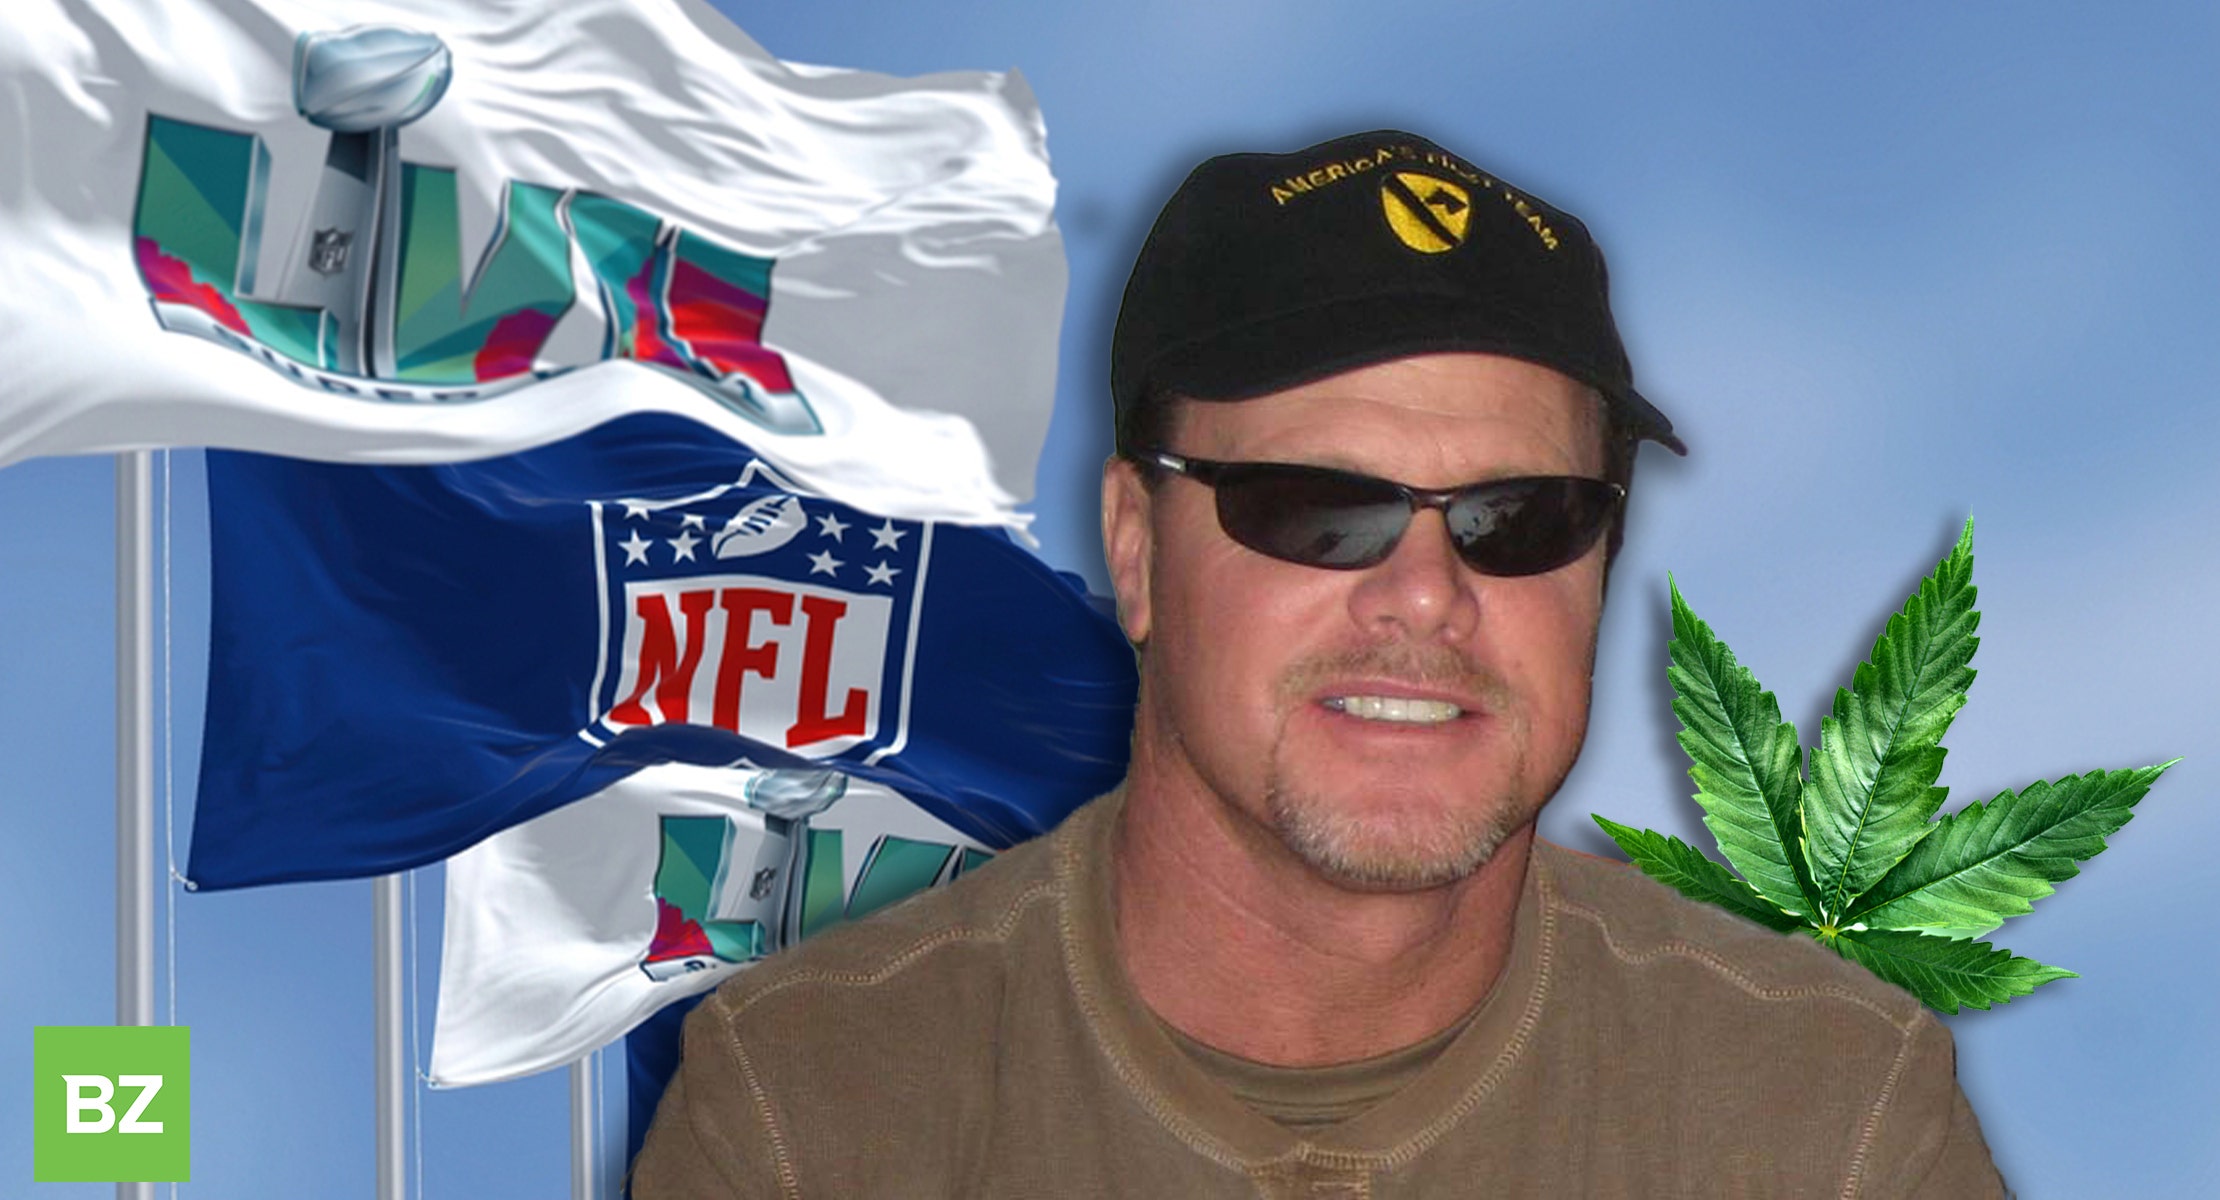 Former NFL Stars Jim McMahon, Kyle Turley & Eben Britton Head For The Super Bowl, Their Cannabis Brand Ready For Kick Off